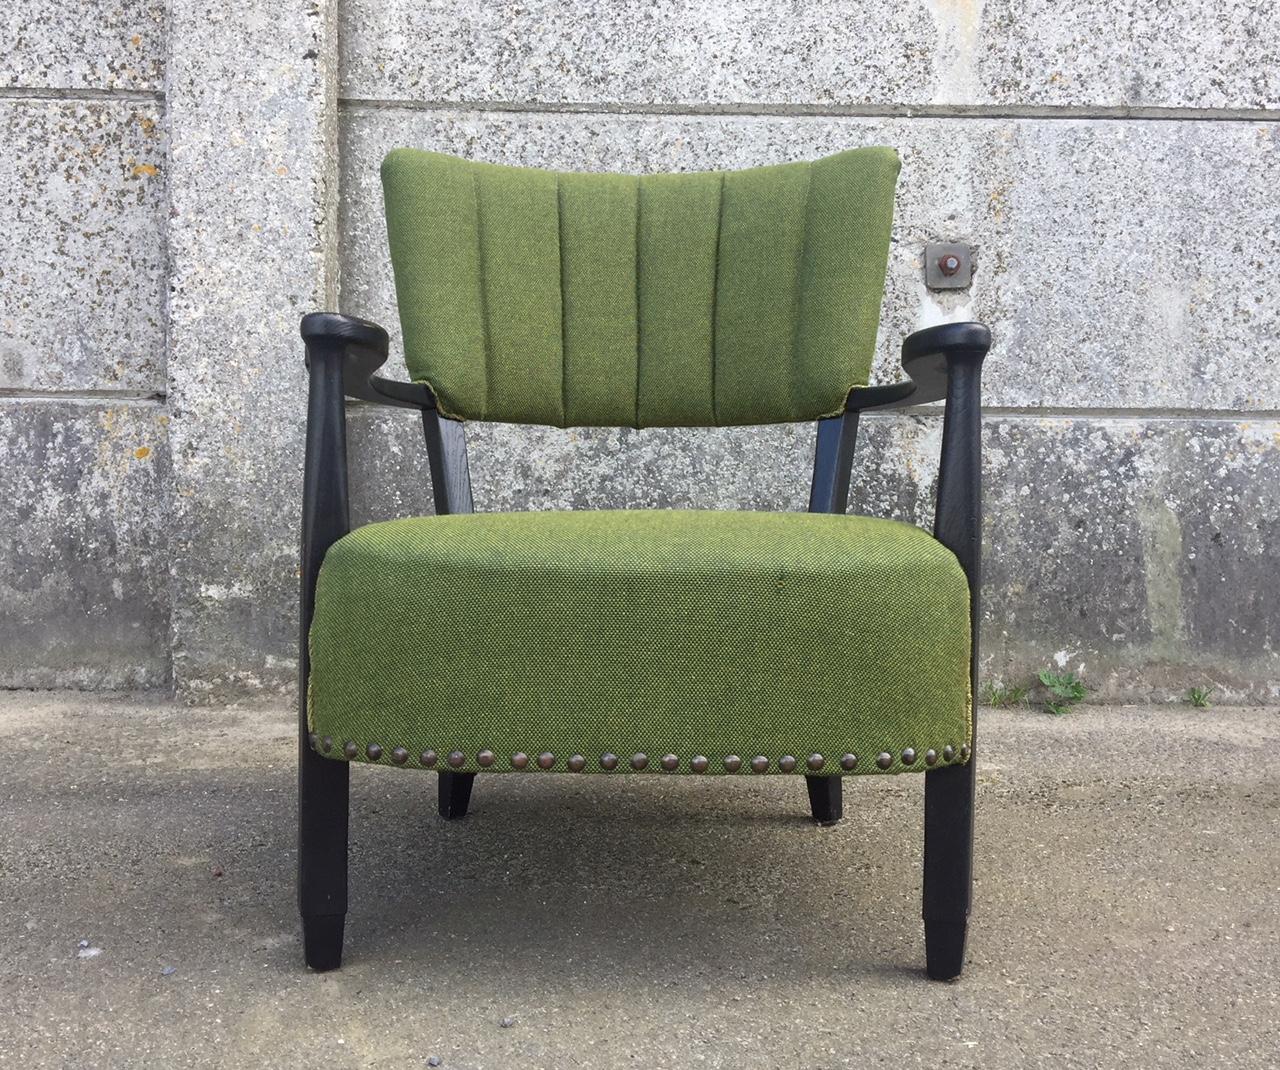 Painted Curved Danish Club Chair with Green Wool Upholstery, 1940s For Sale